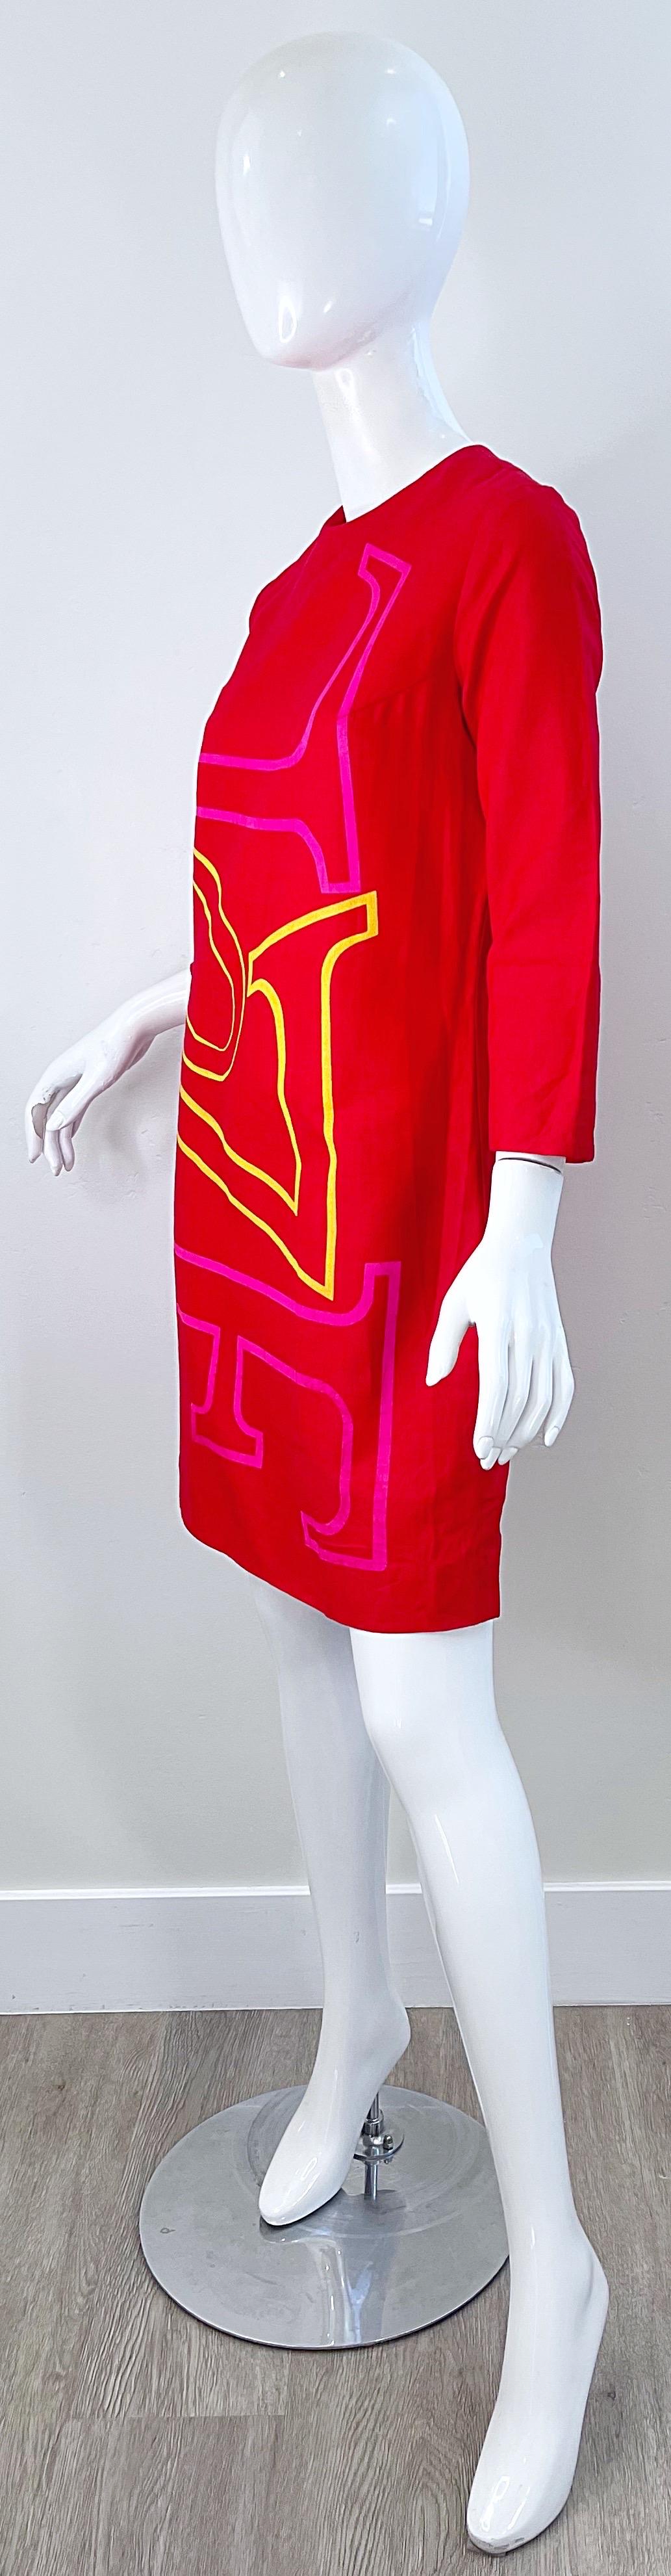 Women's 1960s Robert Indiana LOVE Hand Painted Cotton Red Vintage 60s Shift Dress For Sale